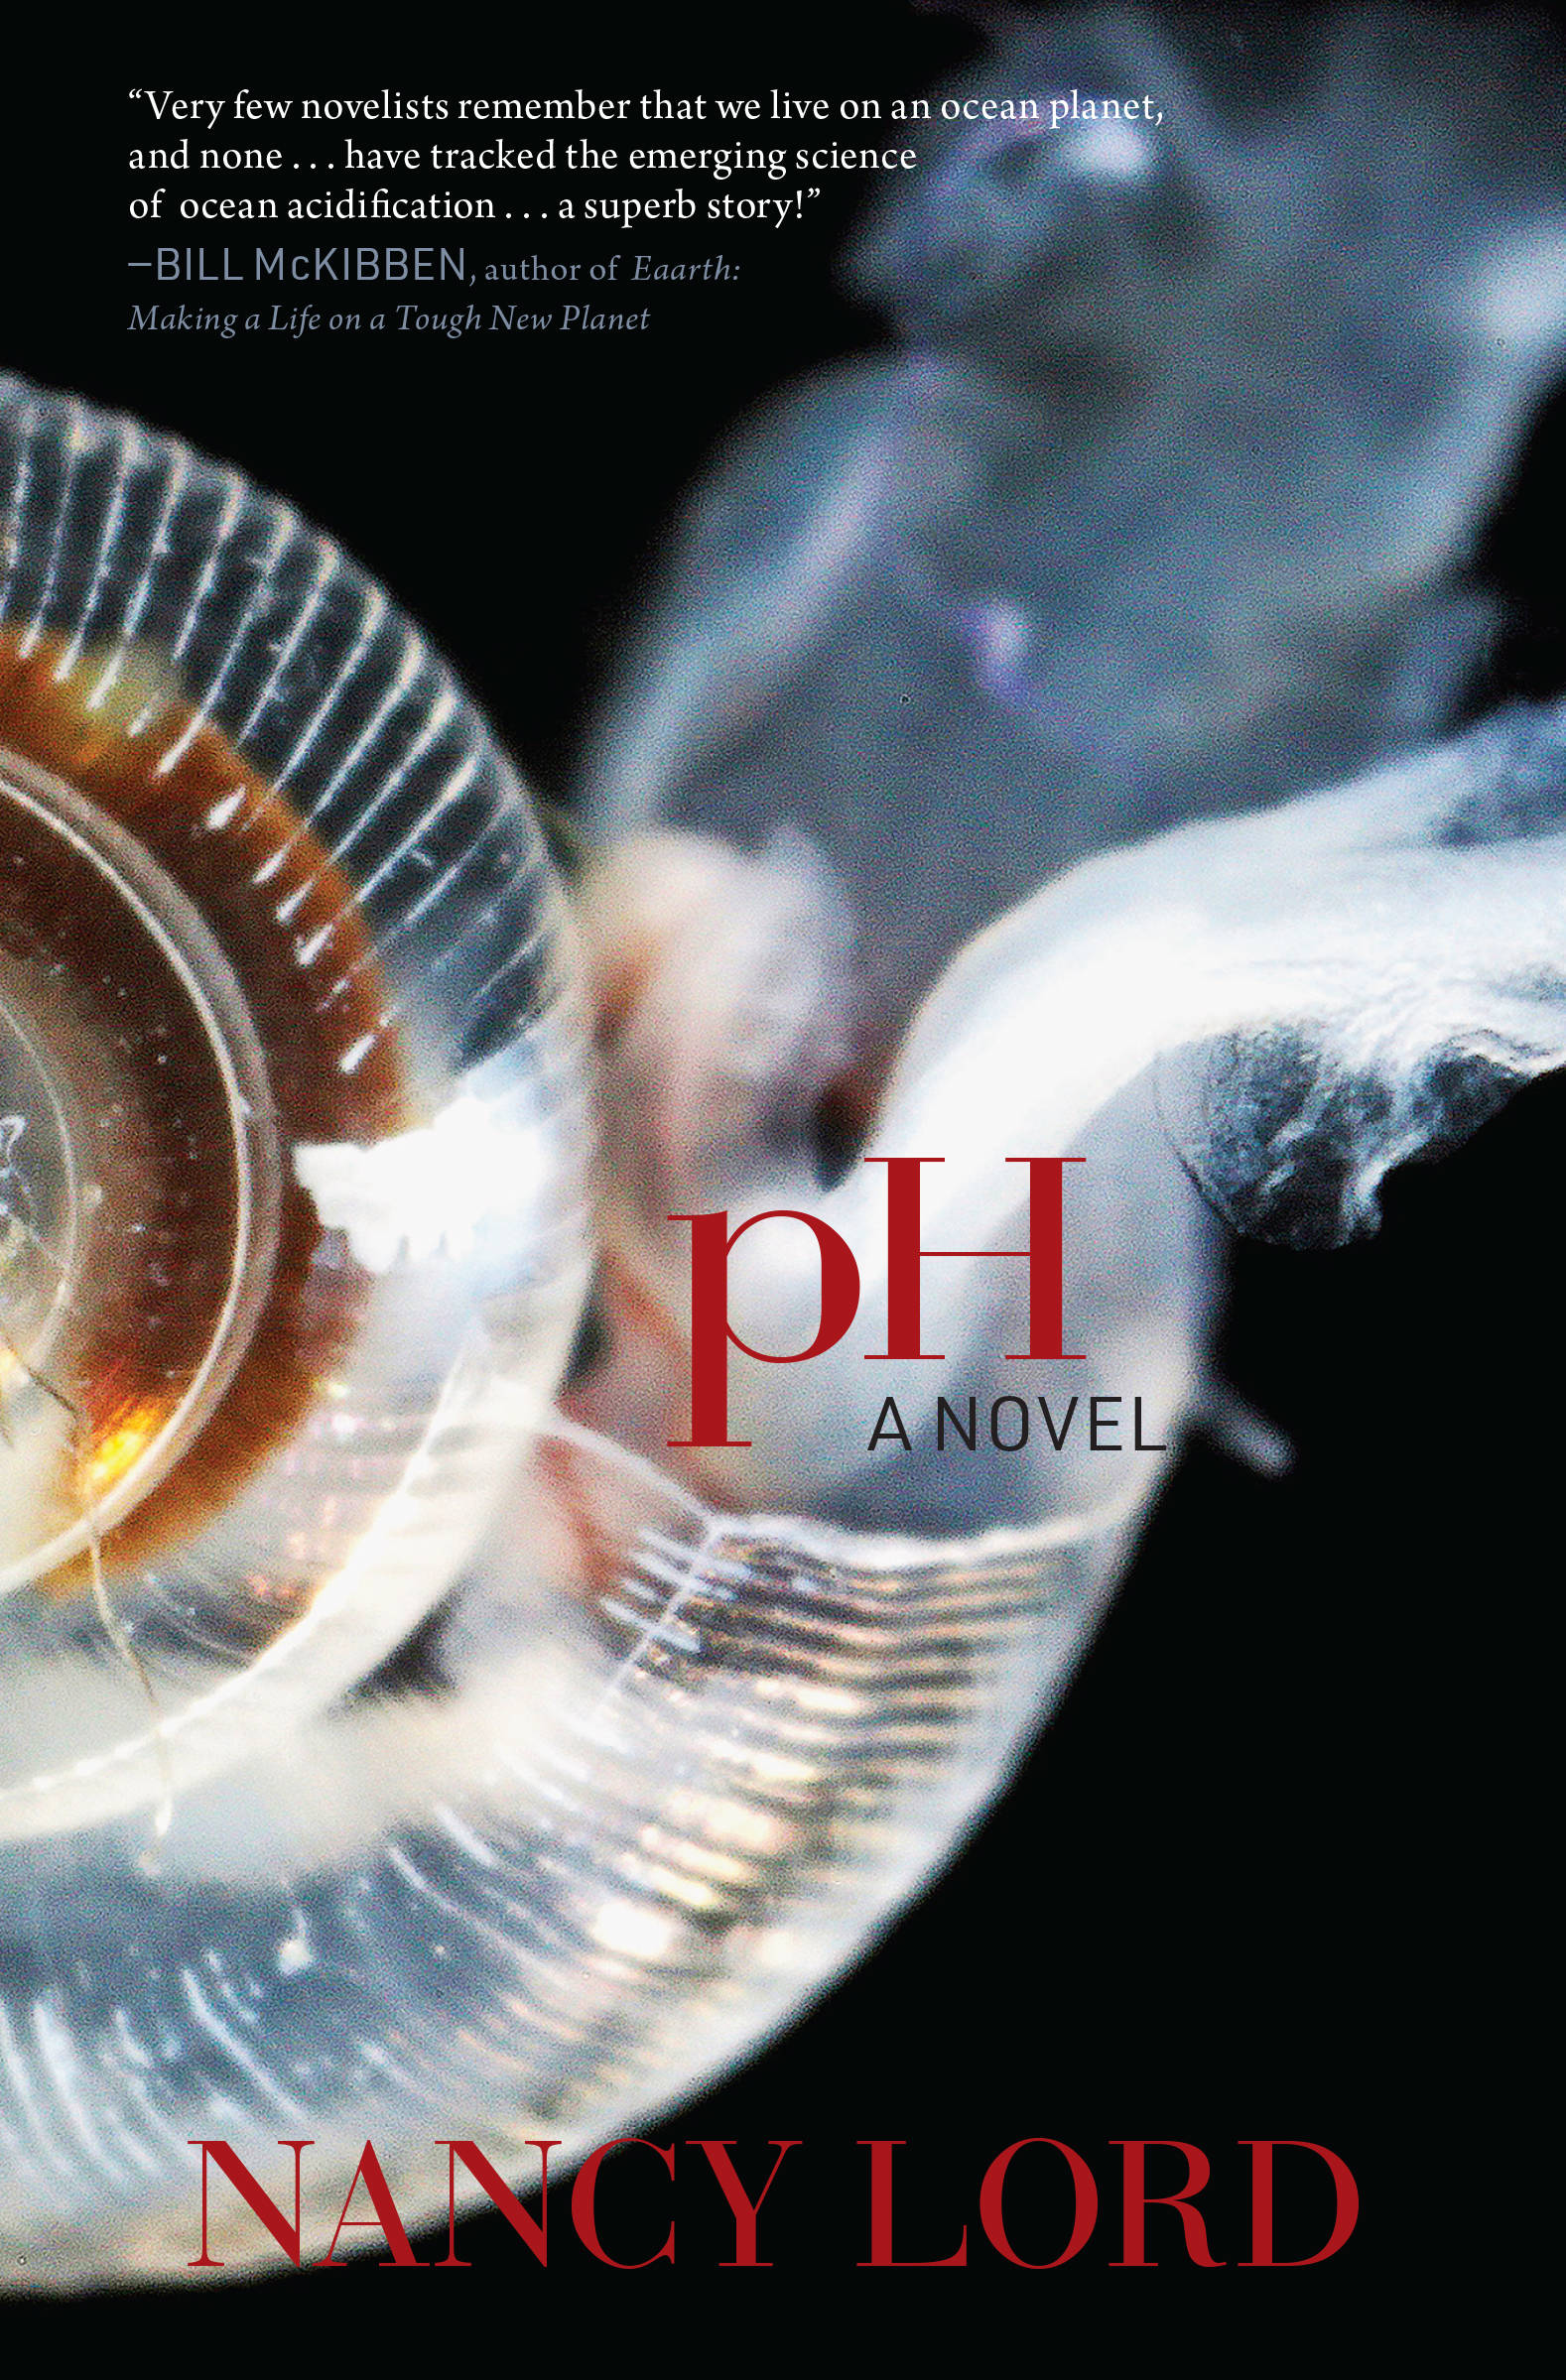 ‘pH’ novel takes new tack to novel: fiction about science